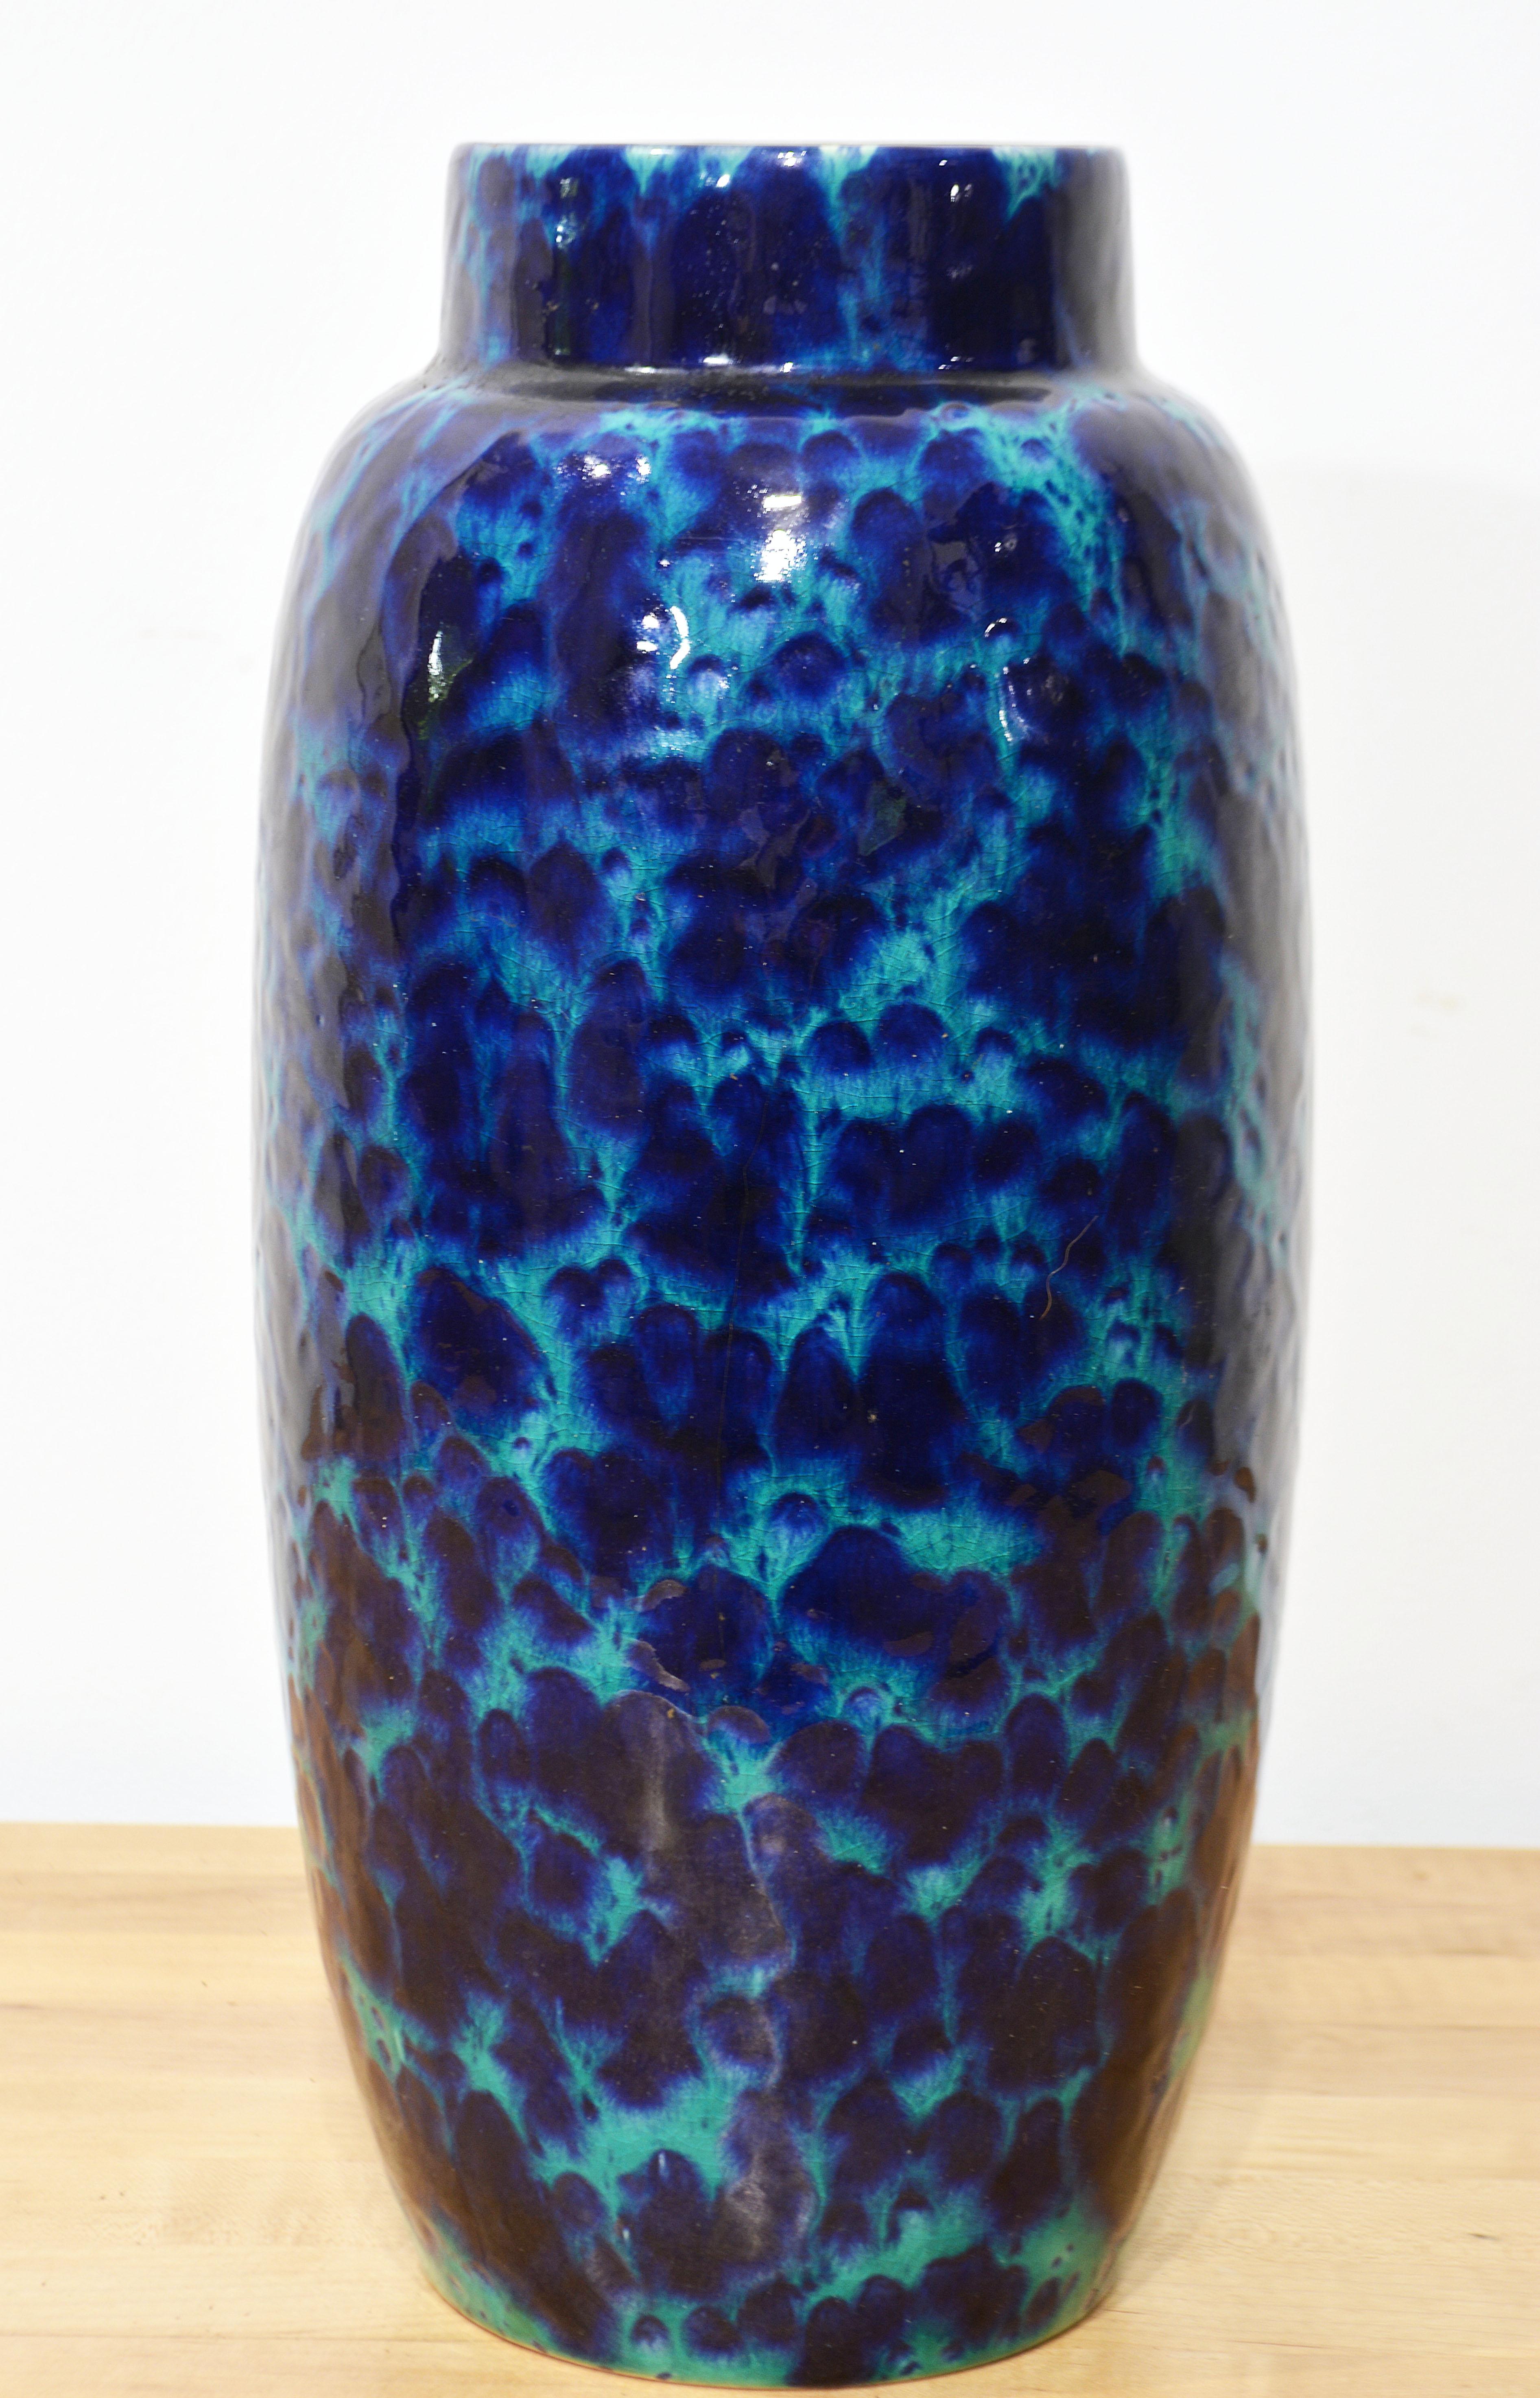 Of elegant form and with an interchanging deep blue and Turquoise fat lava style glaze this vase adds timeless vibrancy and style to a home.. The vase is inscribed West Germany and the number 553-38 on the bottom and is made by Scheurich Keramik in